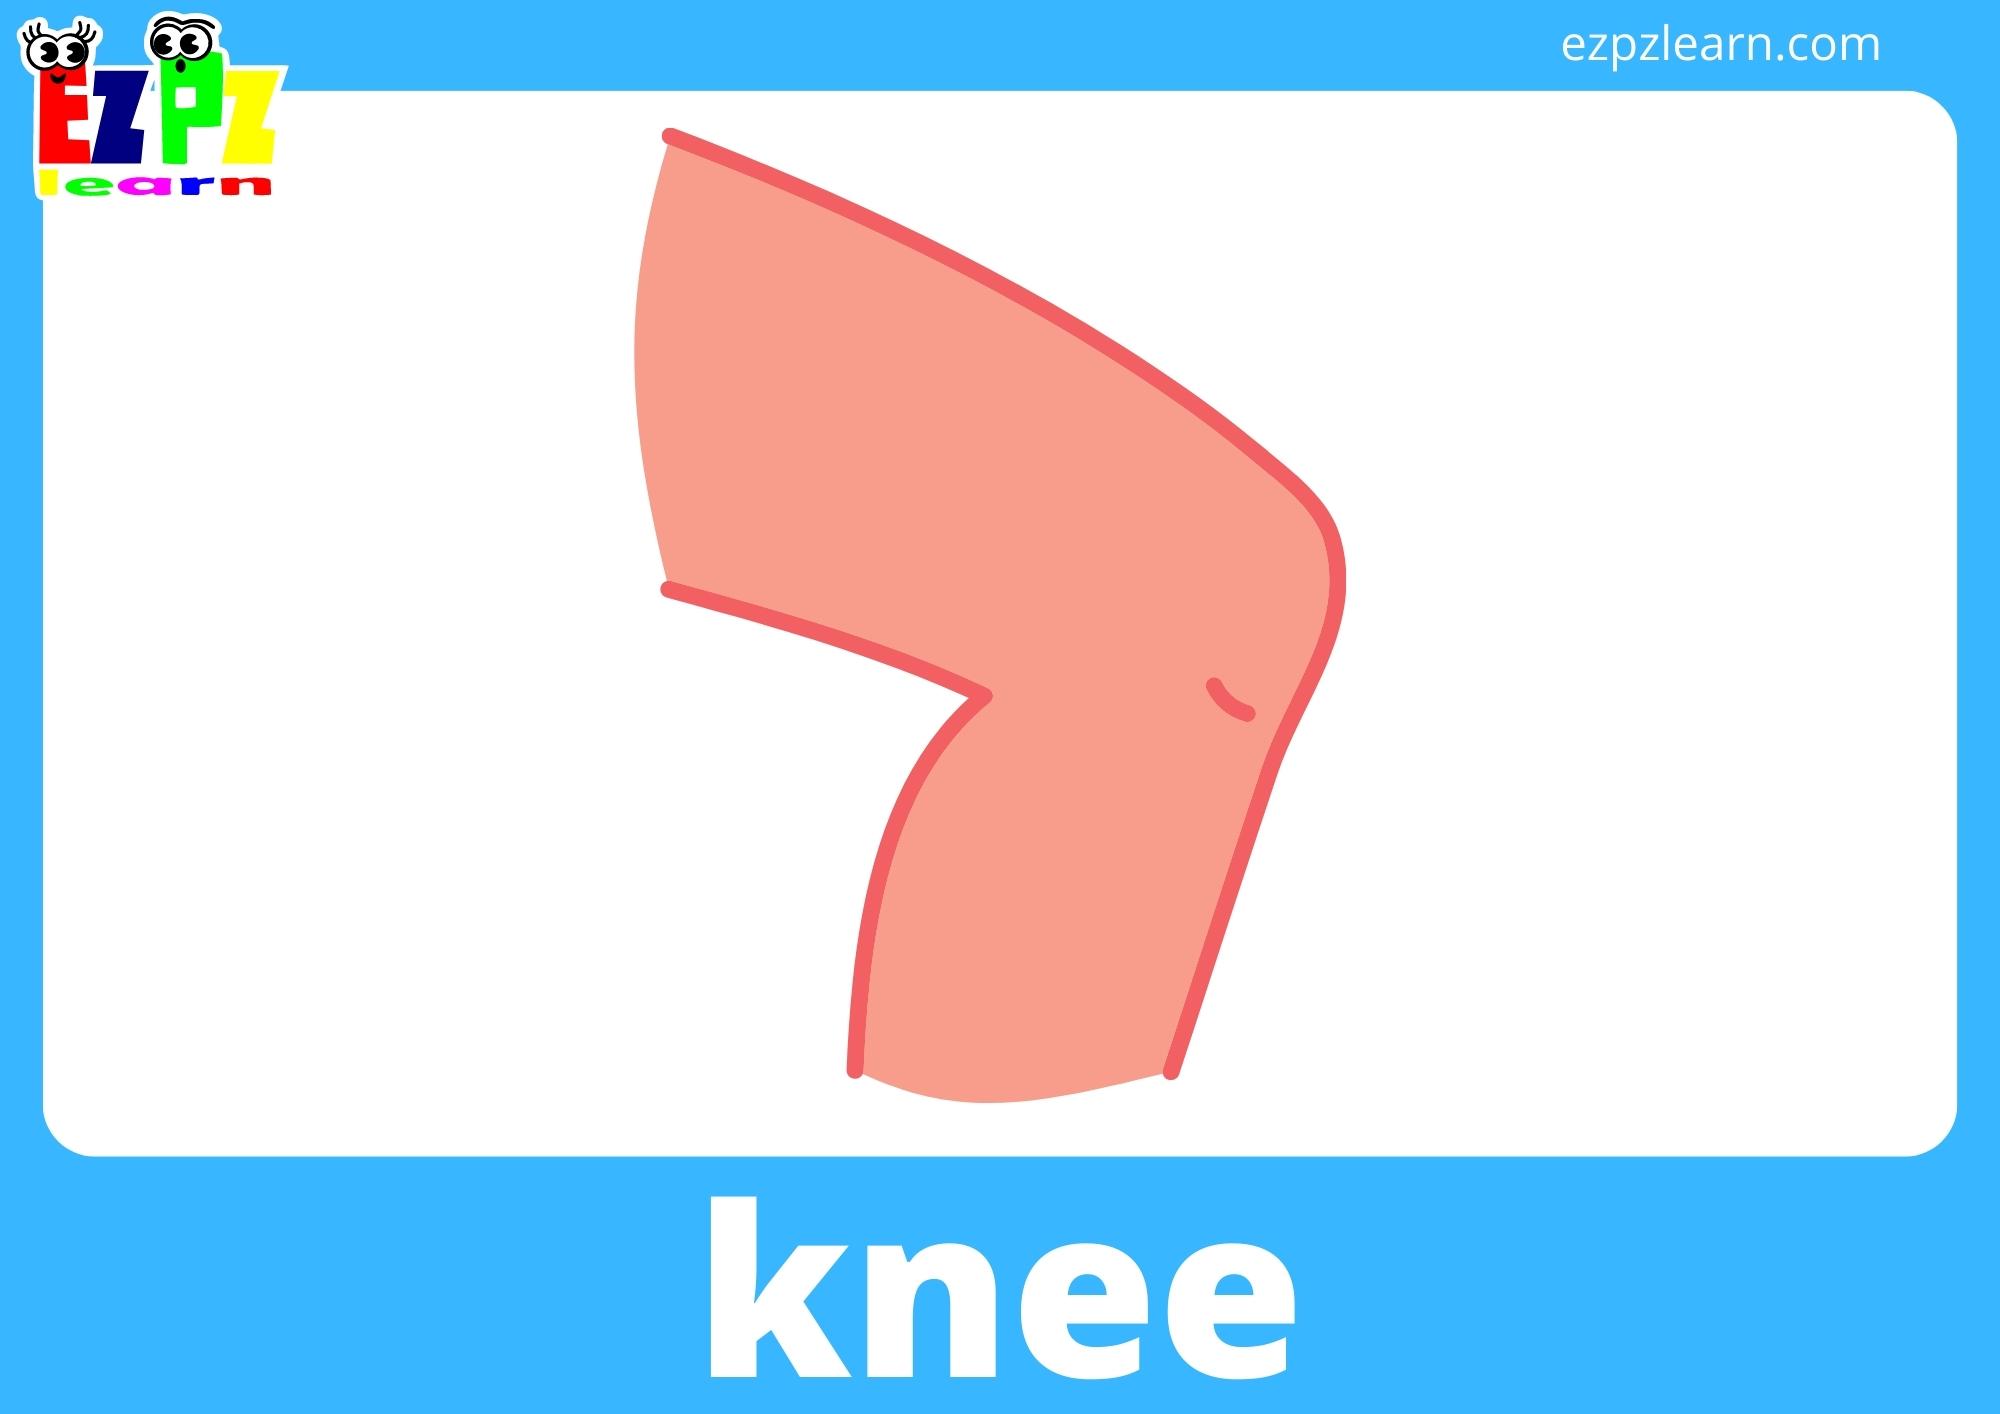 Body Parts Flashcards With Words View Online or PDF Download